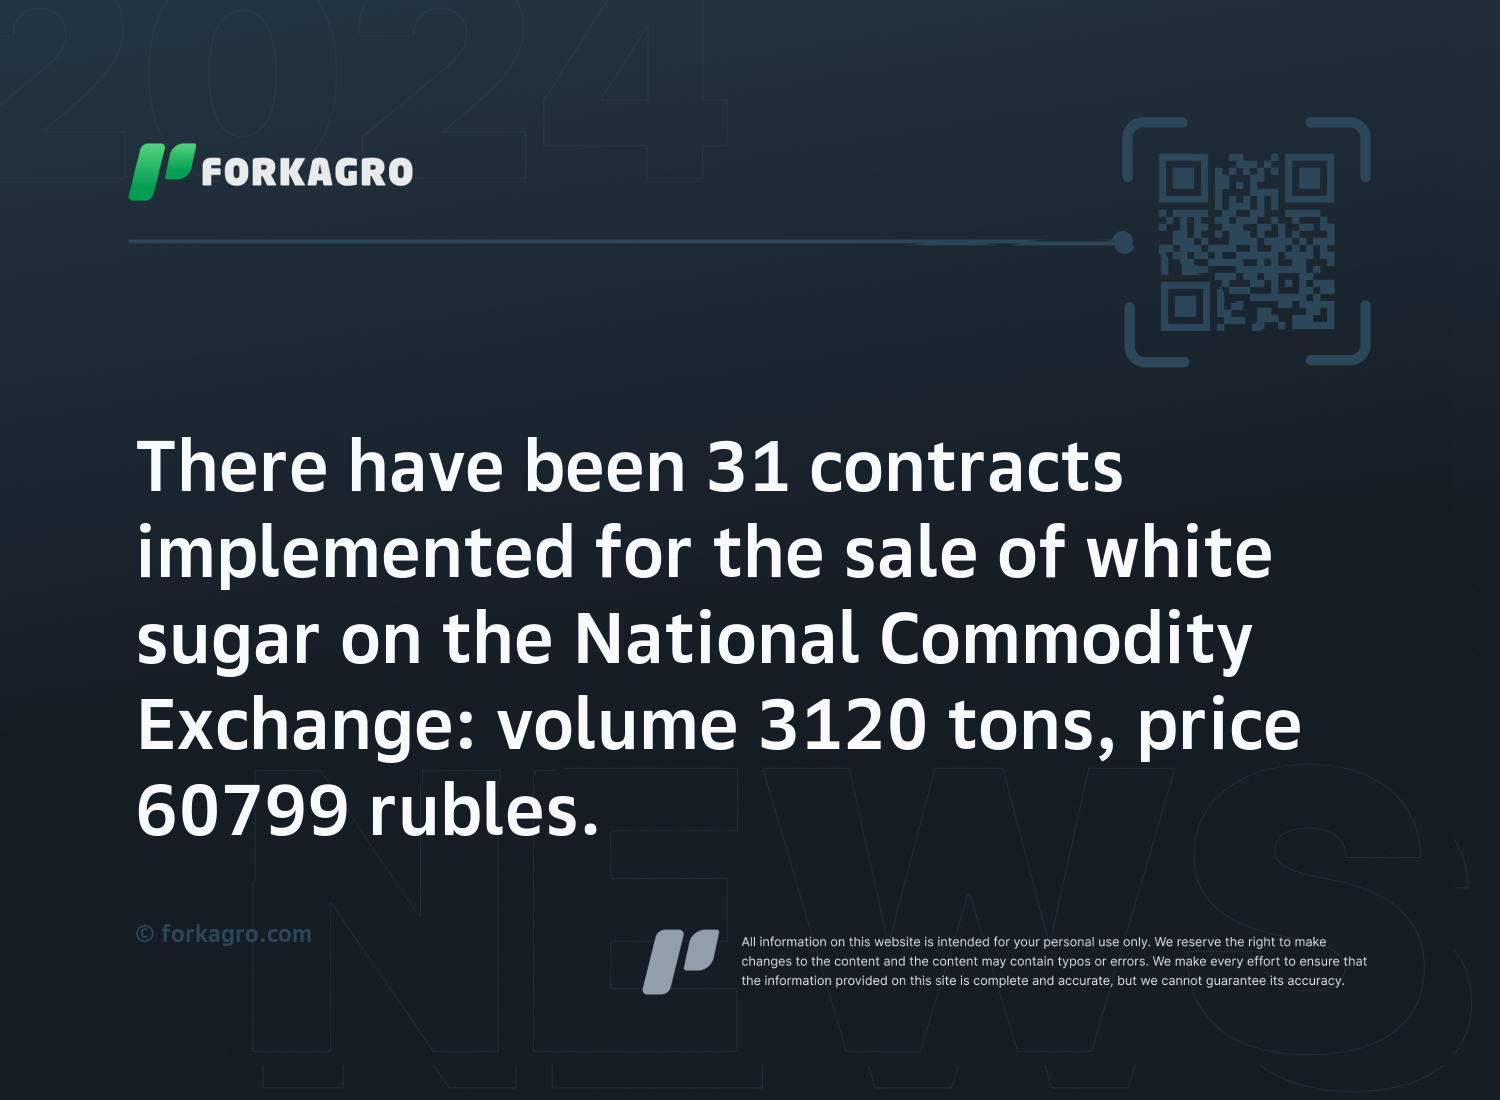 There have been 31 contracts implemented for the sale of white sugar on the National Commodity Exchange: volume 3120 tons, price 60799 rubles.